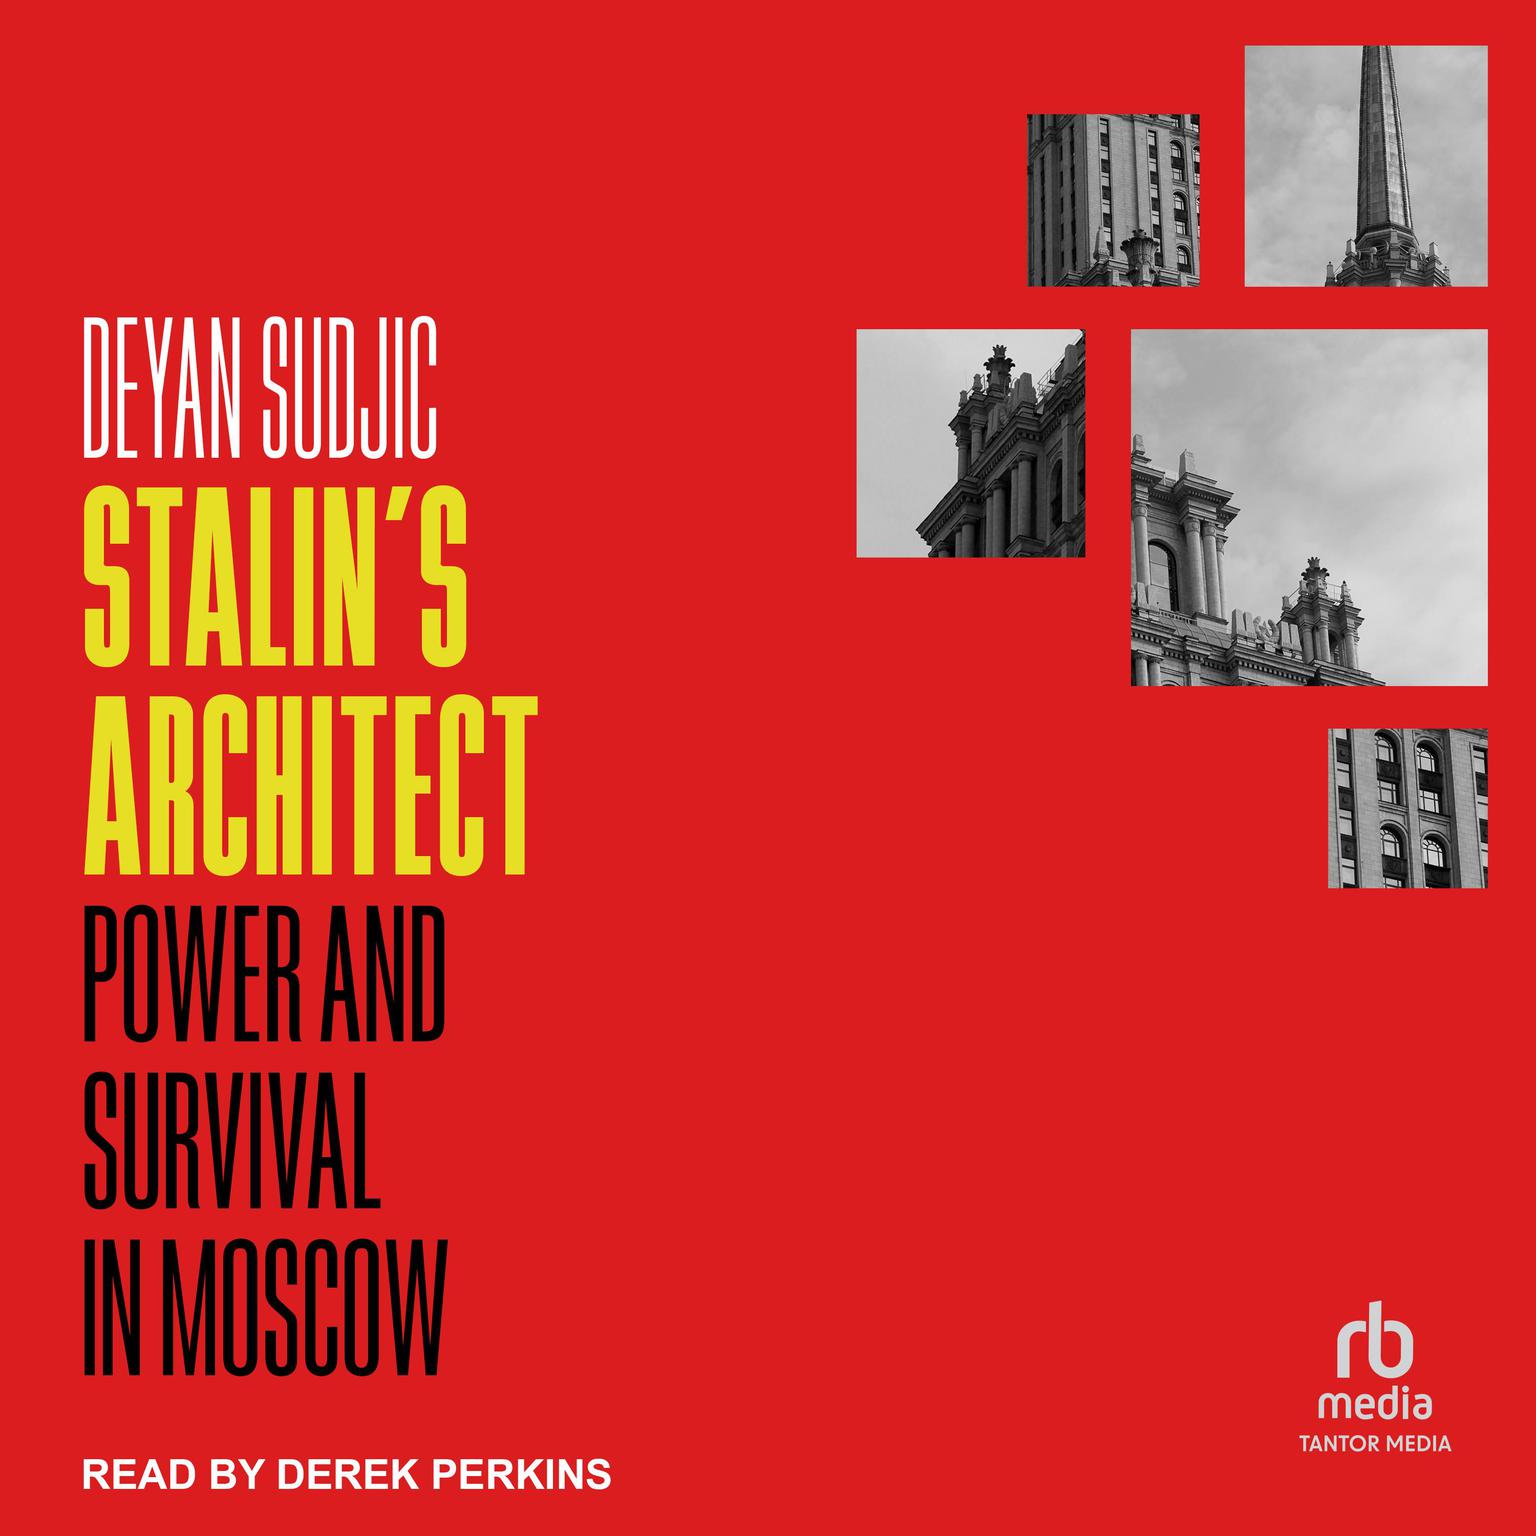 Stalins Architect: Power and Survival in Moscow Audiobook, by Deyan Sudjic